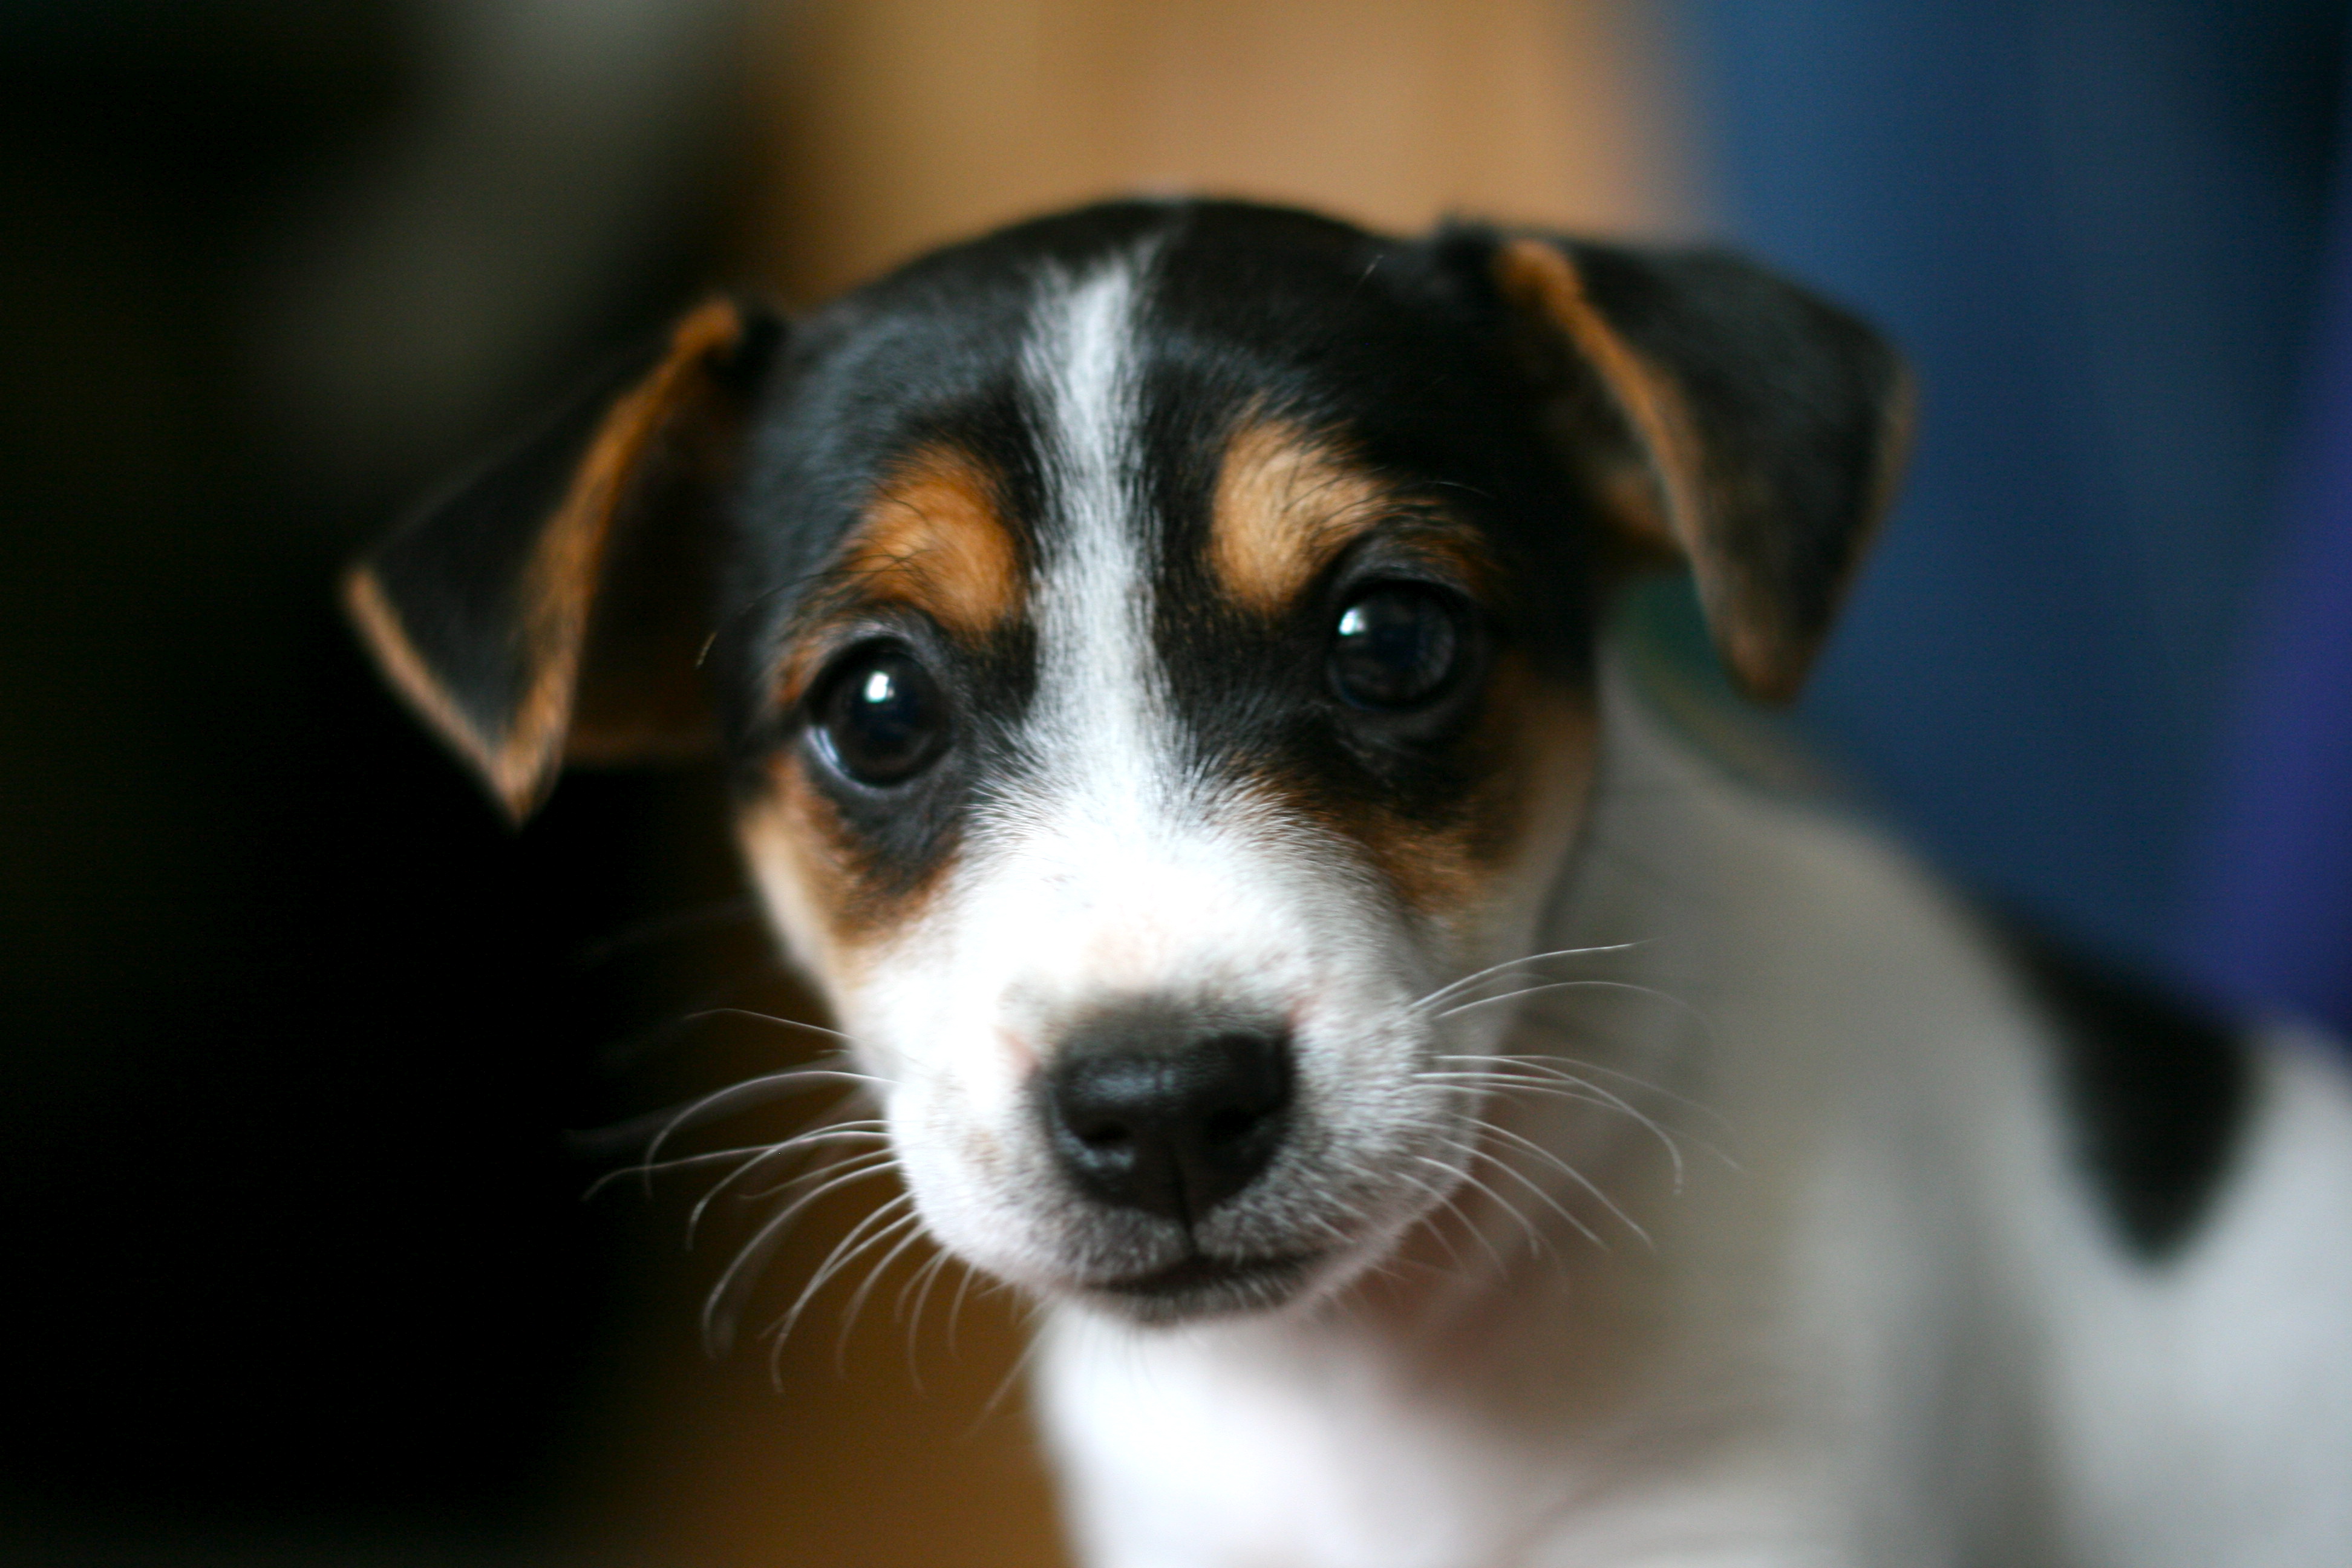 Misty - adorable Jack Russell puppy ;) | Flickr - Photo Sharing!